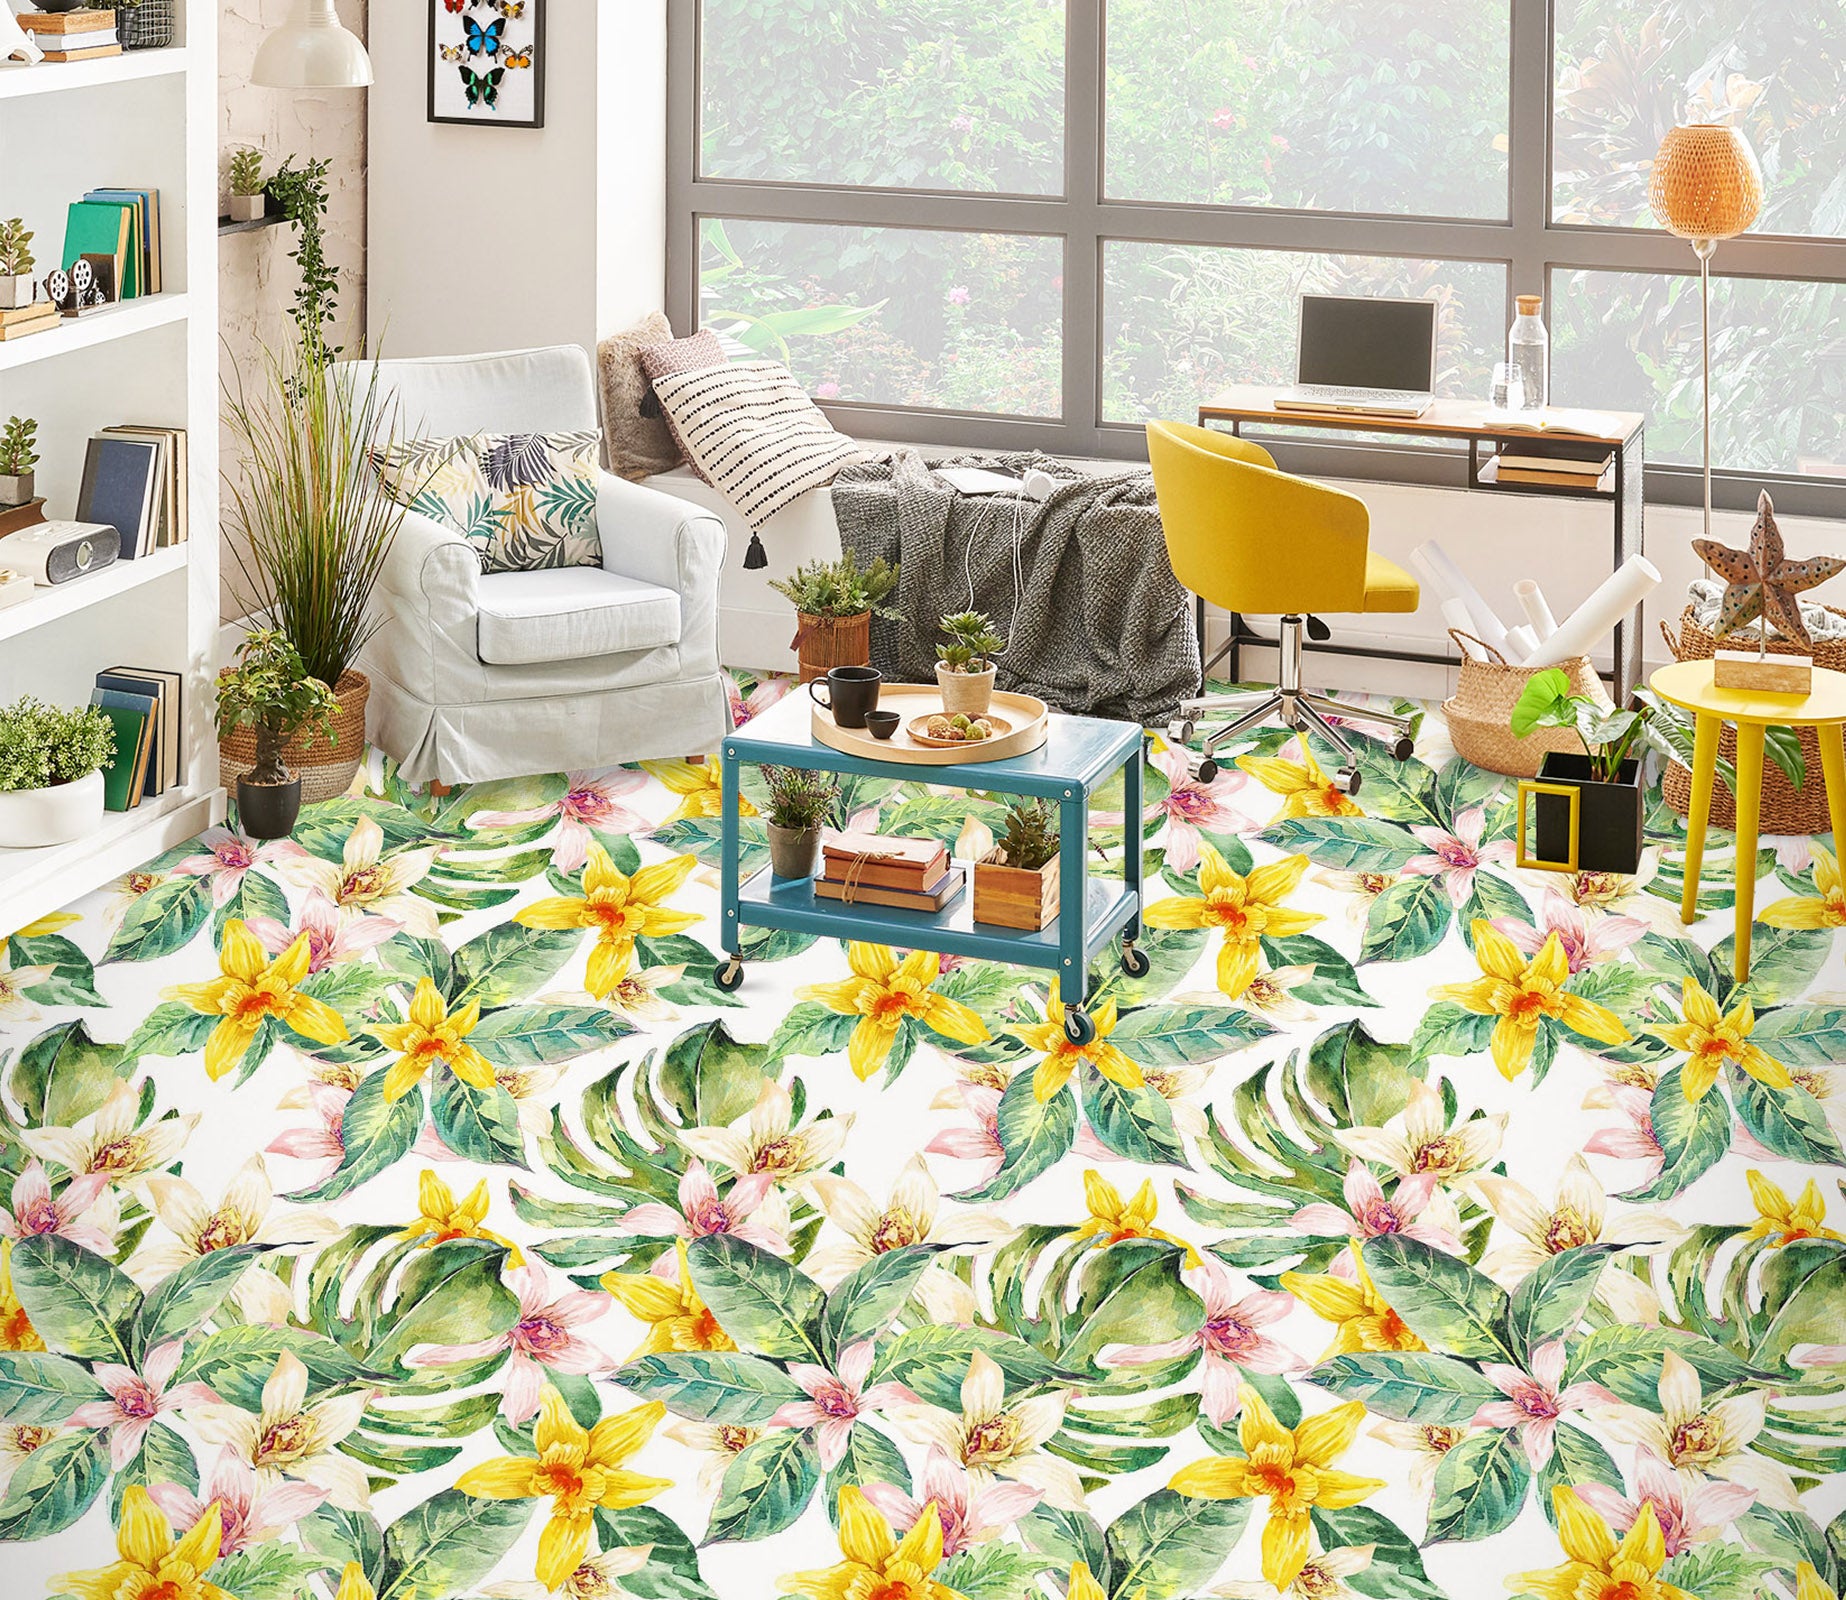 3D Yellow Flower Painting 1257 Floor Mural  Wallpaper Murals Self-Adhesive Removable Print Epoxy